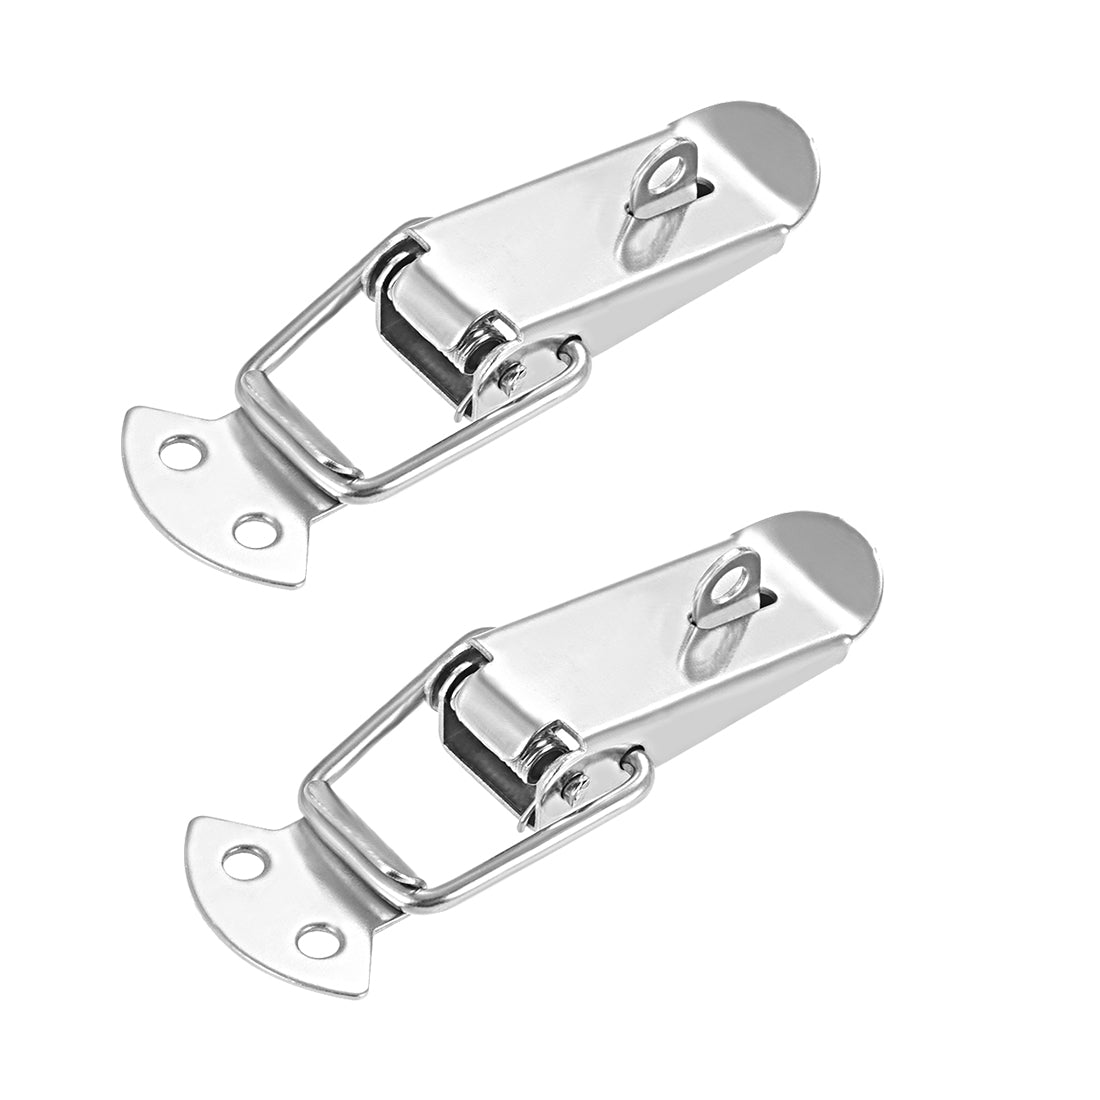 uxcell Uxcell 2 Pcs 201 Stainless Steel Spring Loaded Toggle Case Box Chest Trunk Latch Catches Hasps Clamps,  90mm Length